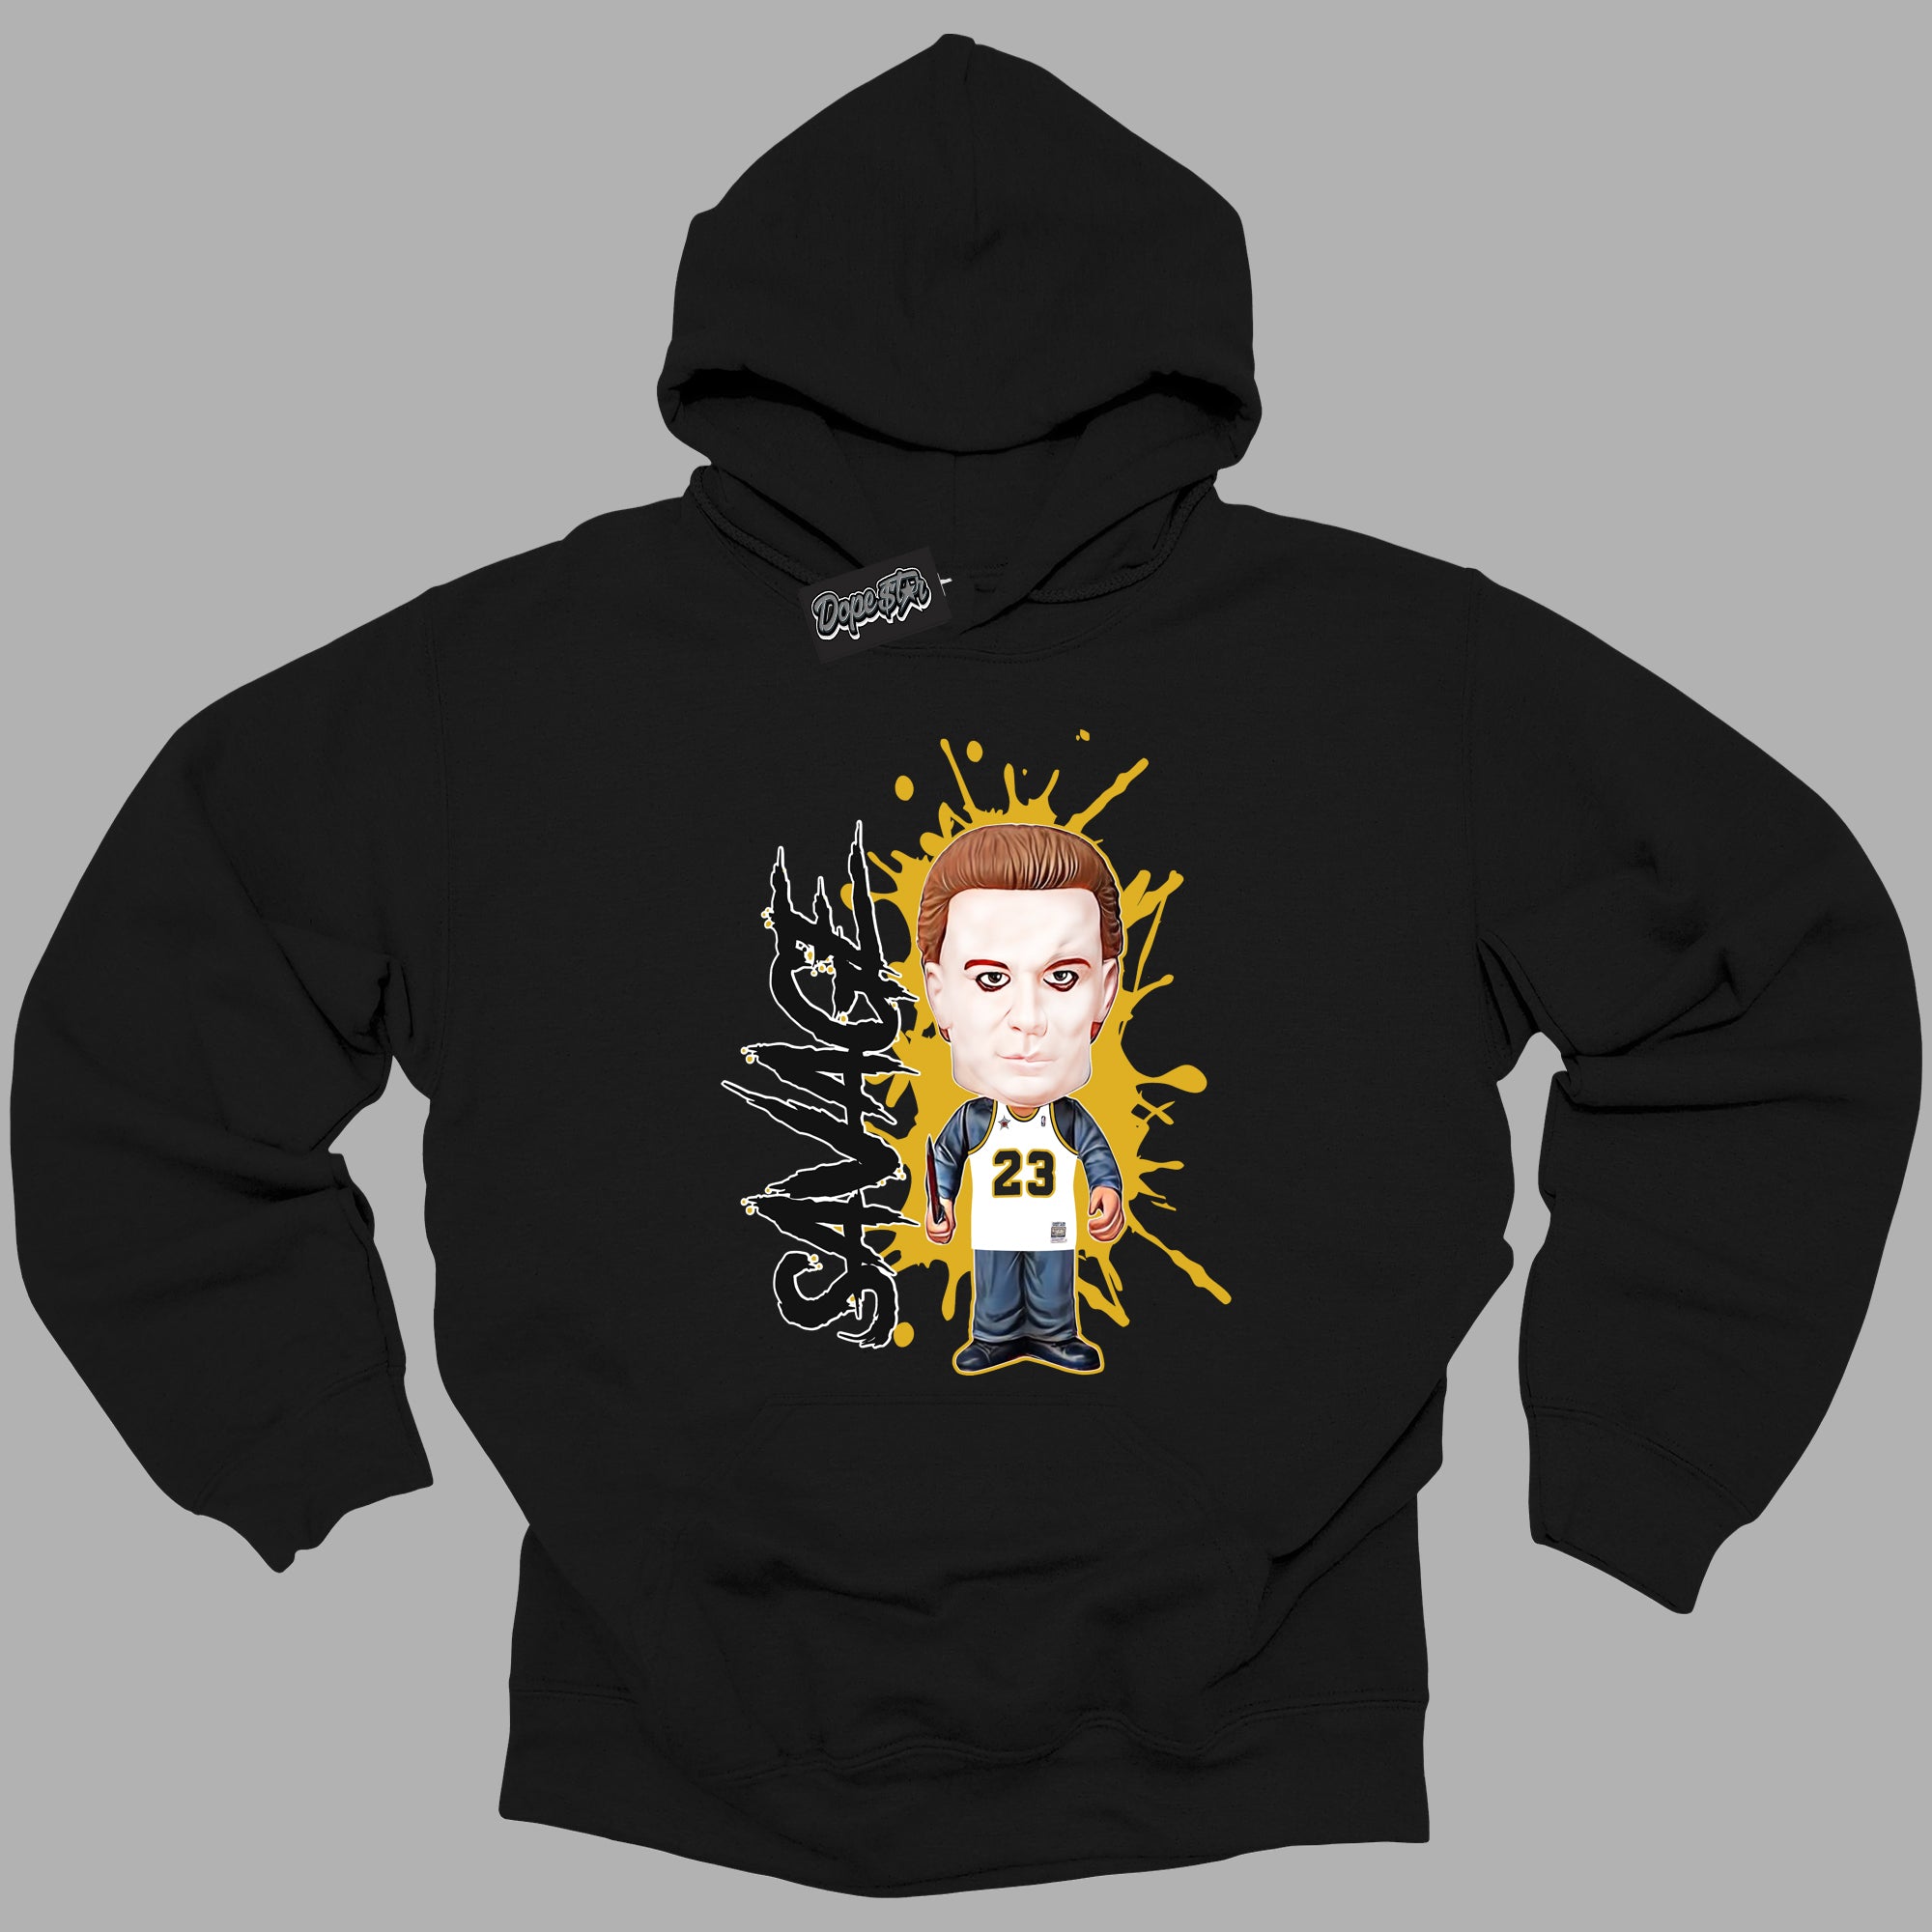 Cool Black Hoodie with “ Michael Myers Savage ”  design that Perfectly Matches Yellow Ochre 6s Sneakers.